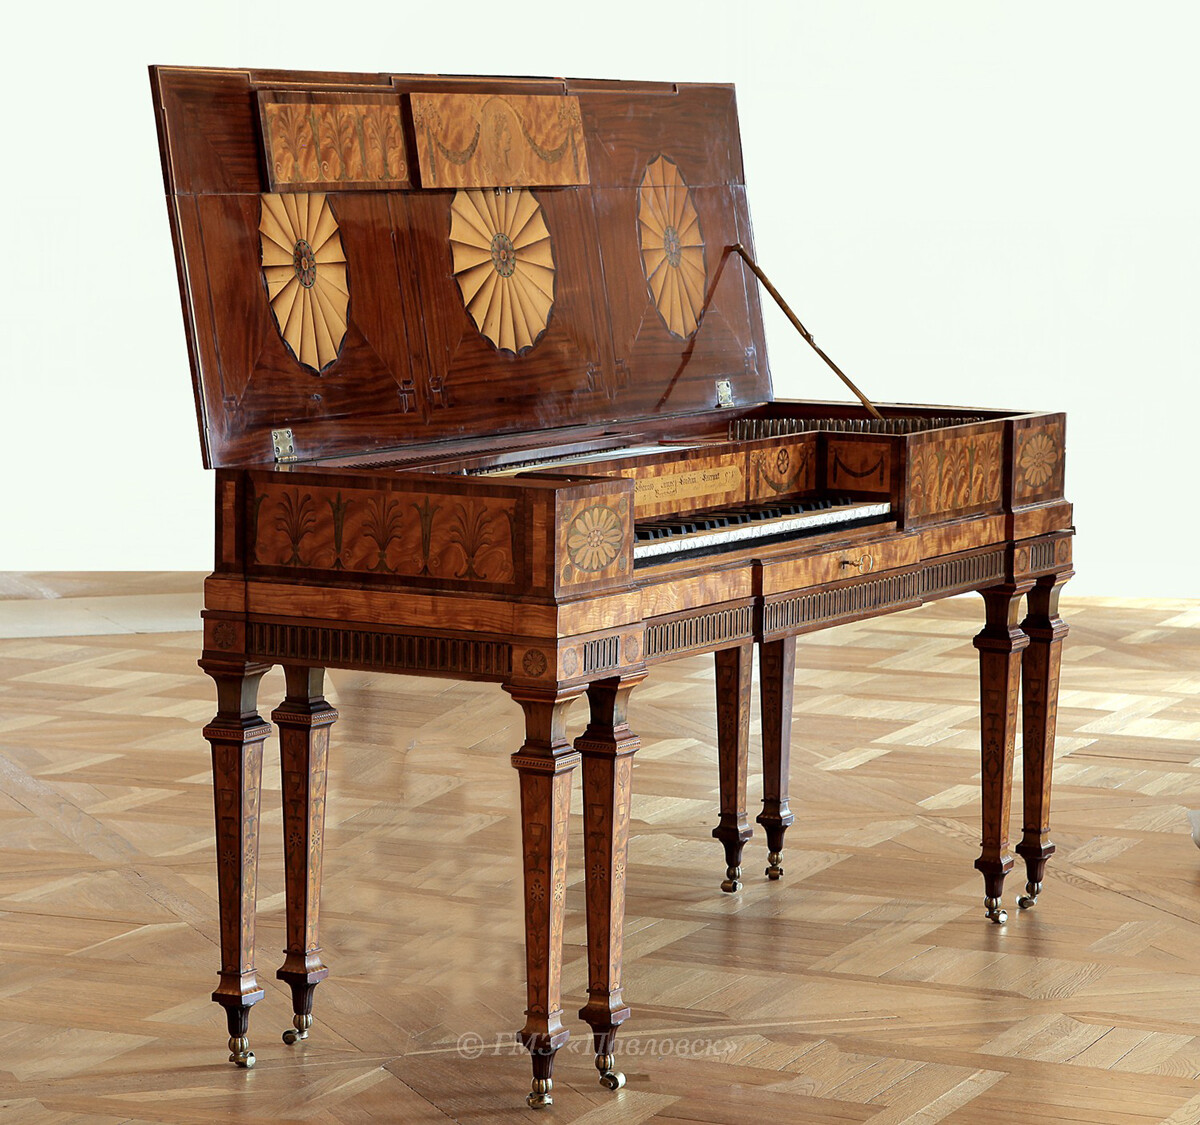 A square piano made by Johannes Zumpe (1726-1783), owned by Dowager Empress Maria Fedorovna since 1817. 